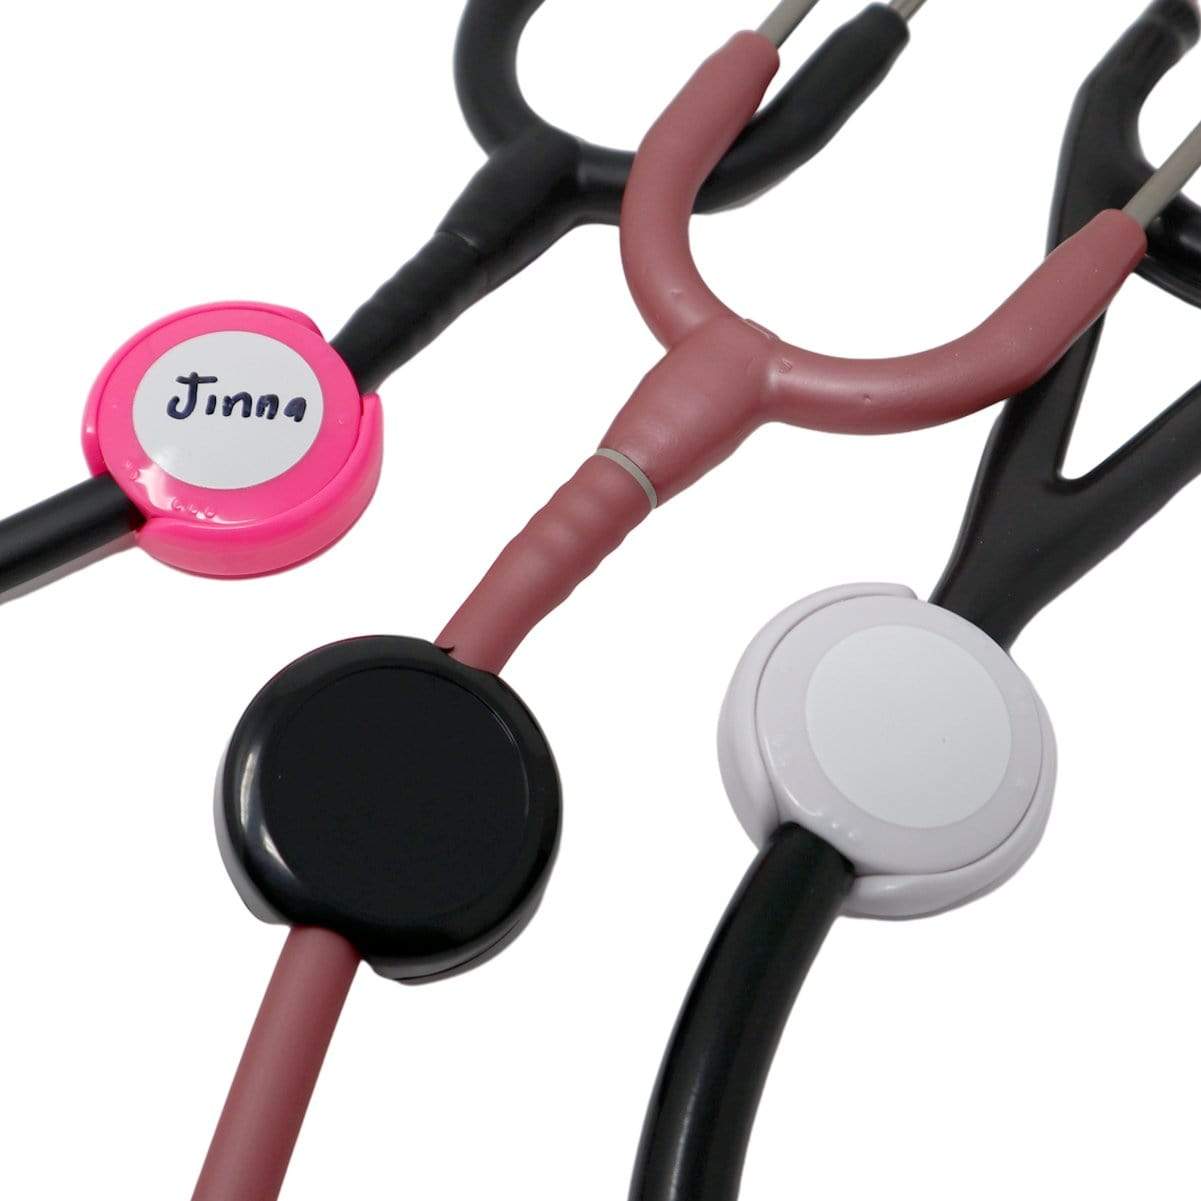 Antimicrobial Stethoscope ID Tag - Customizable Label & Adjustable Tube Size to Fit Most Stehs